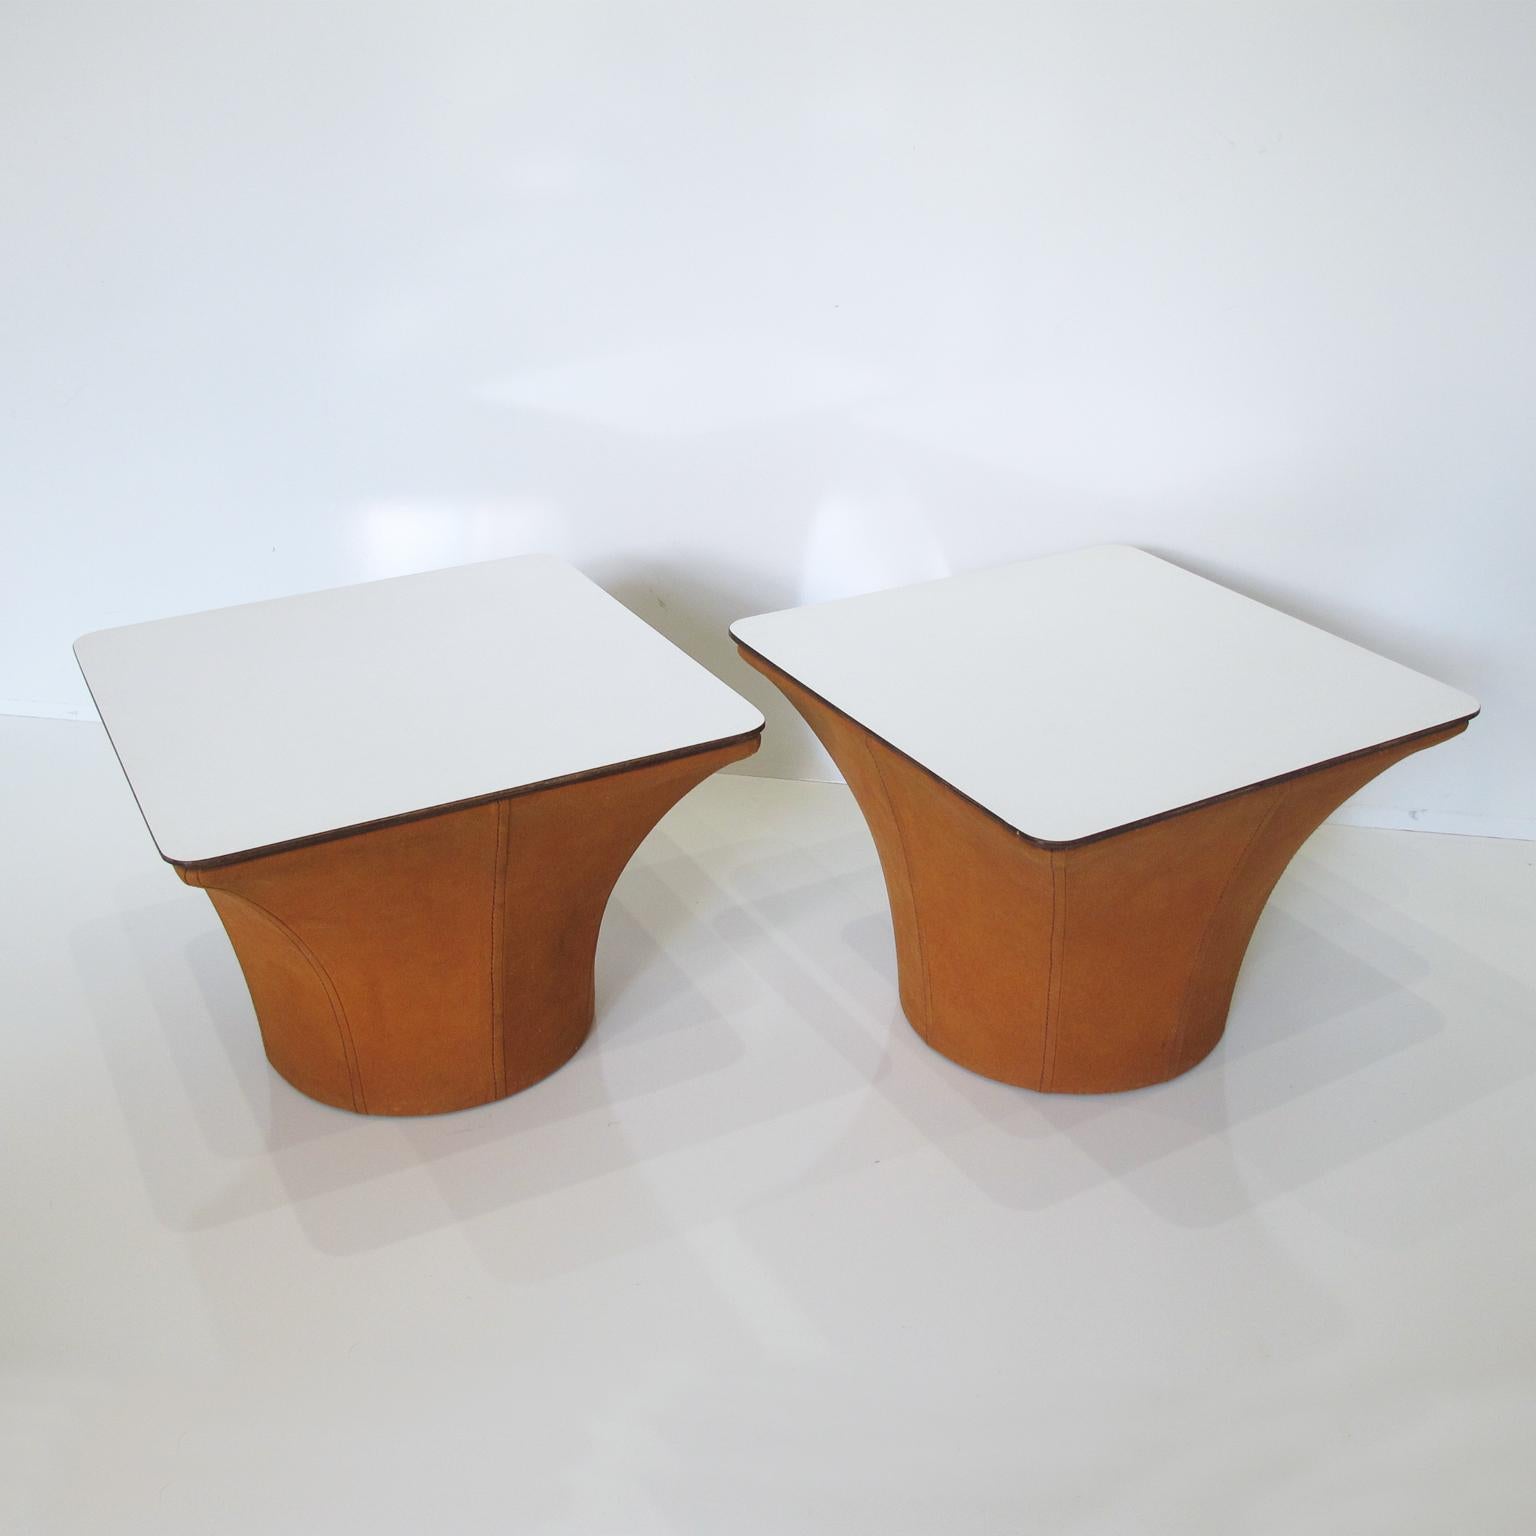 French 1960s Mid-Century Modernist Pair of Side or Coffee Table Mushroom Model